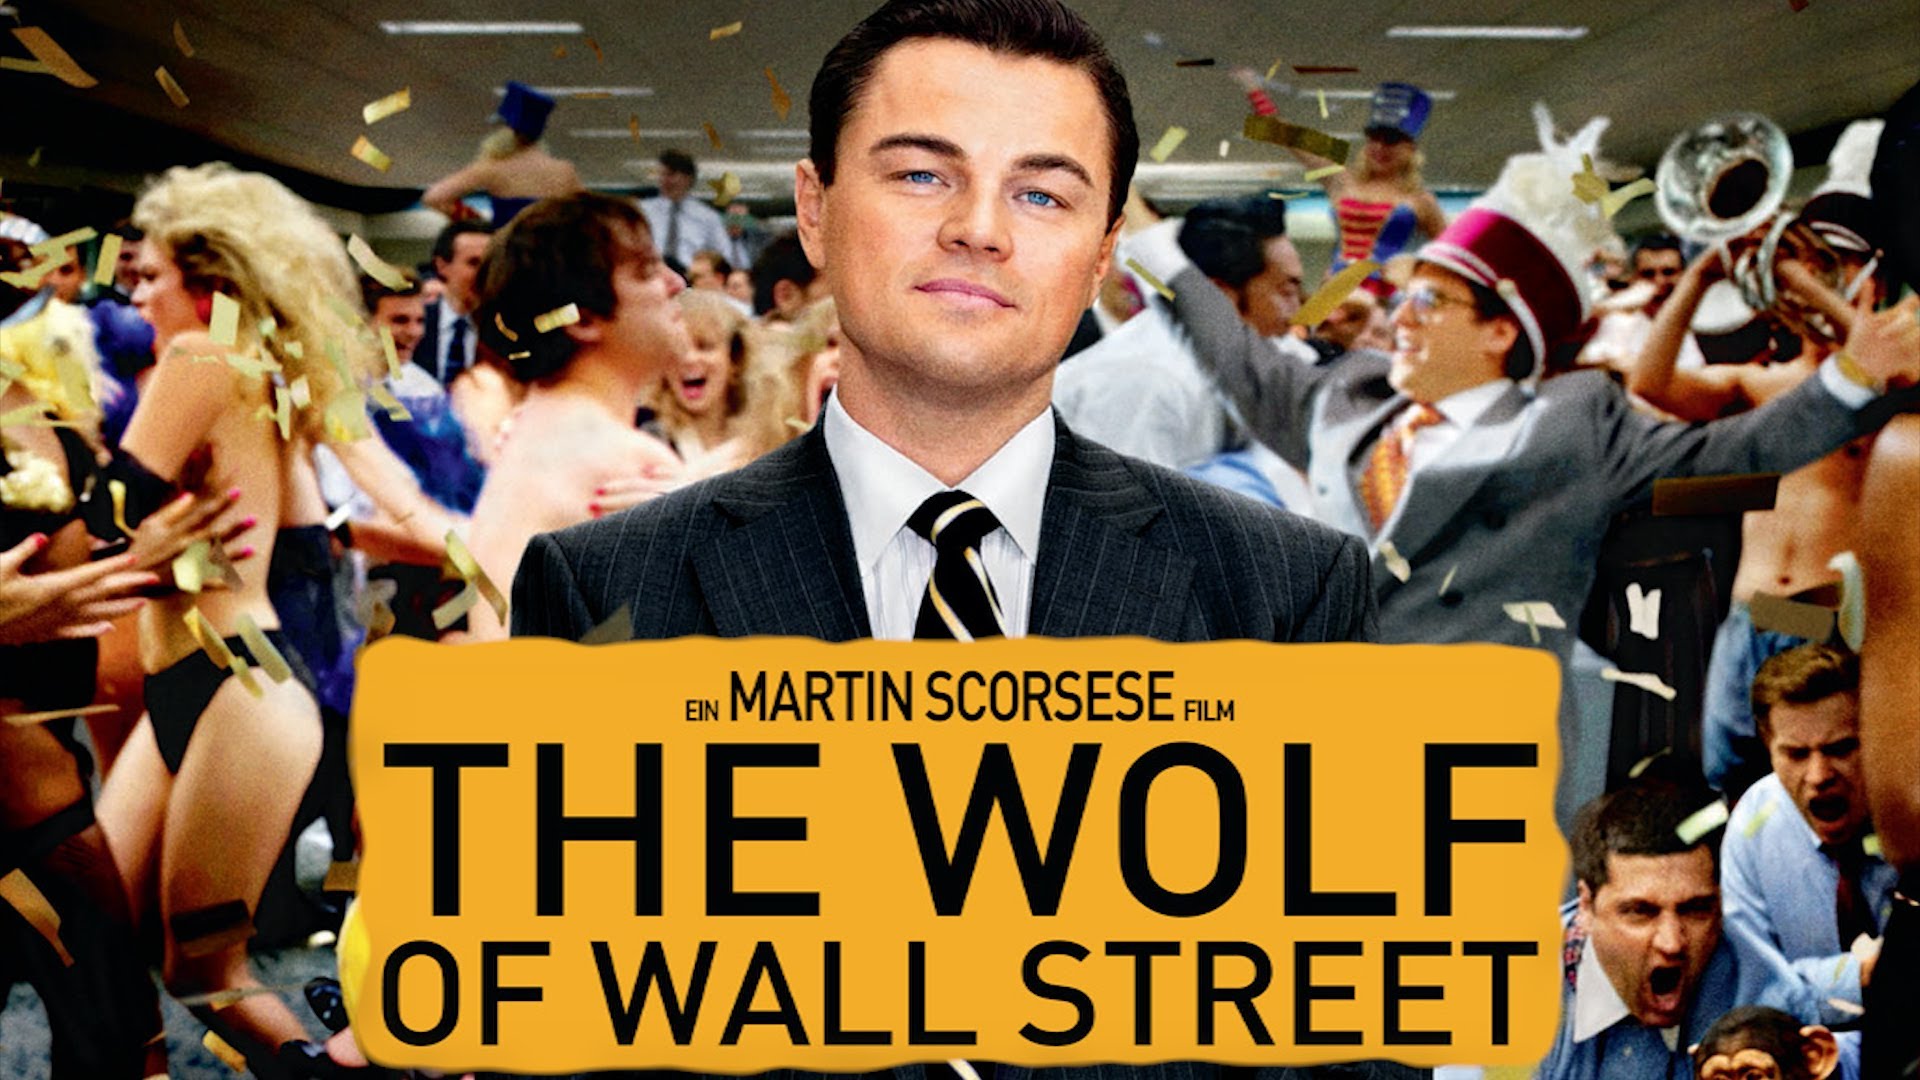 download-the-wolf-of-wall-street-movie-wallpaper.jpg